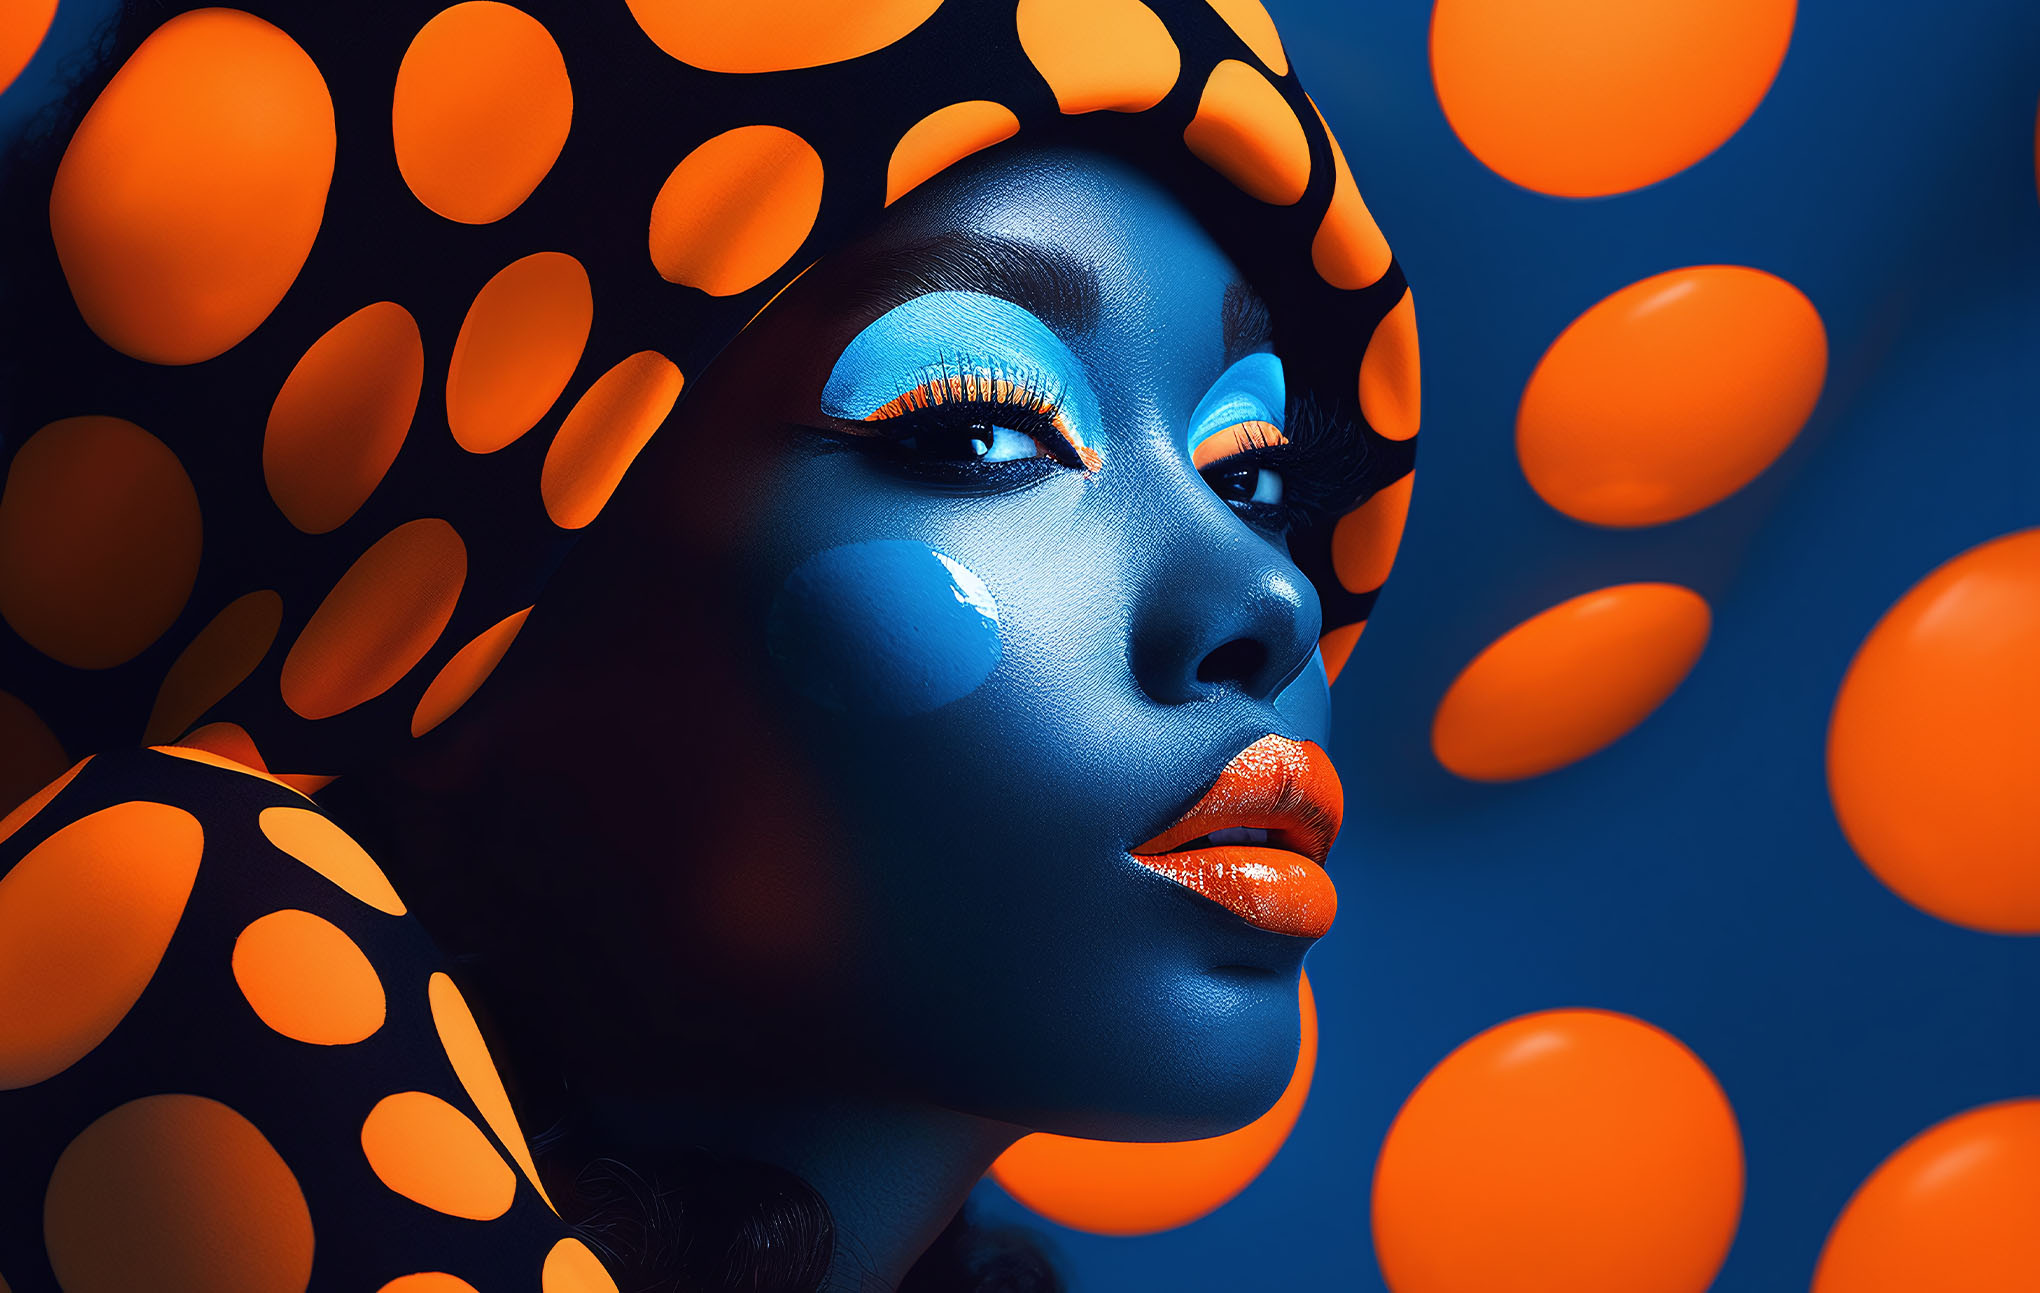 A woman with blue-painted skin features vivid orange lips and turquoise eye makeup. she wears a black hat with orange polka dots, matching the background's blue with orange dots. her expression is contemplative.